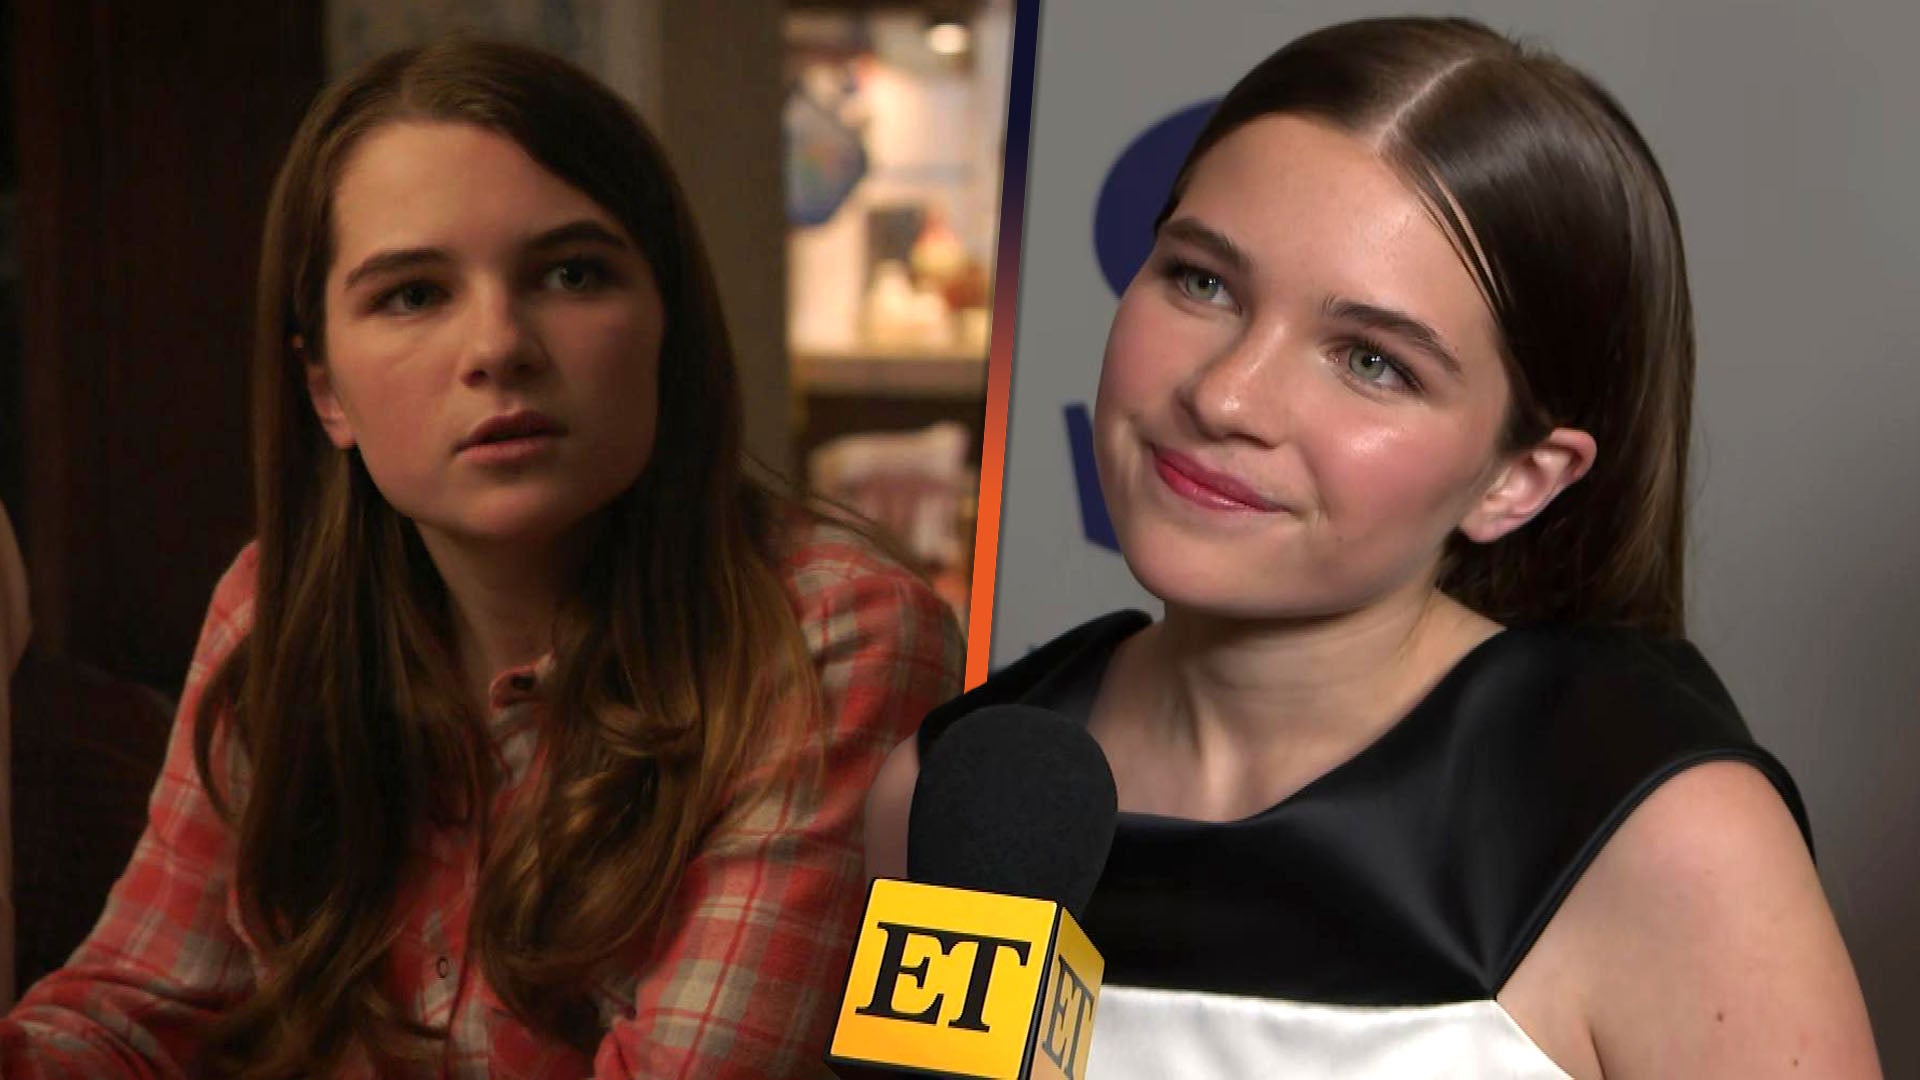 ‘Young Sheldon’ Star Raegan Revord on If She’s Open to Series' Spin-Off Appearance (Exclusive)